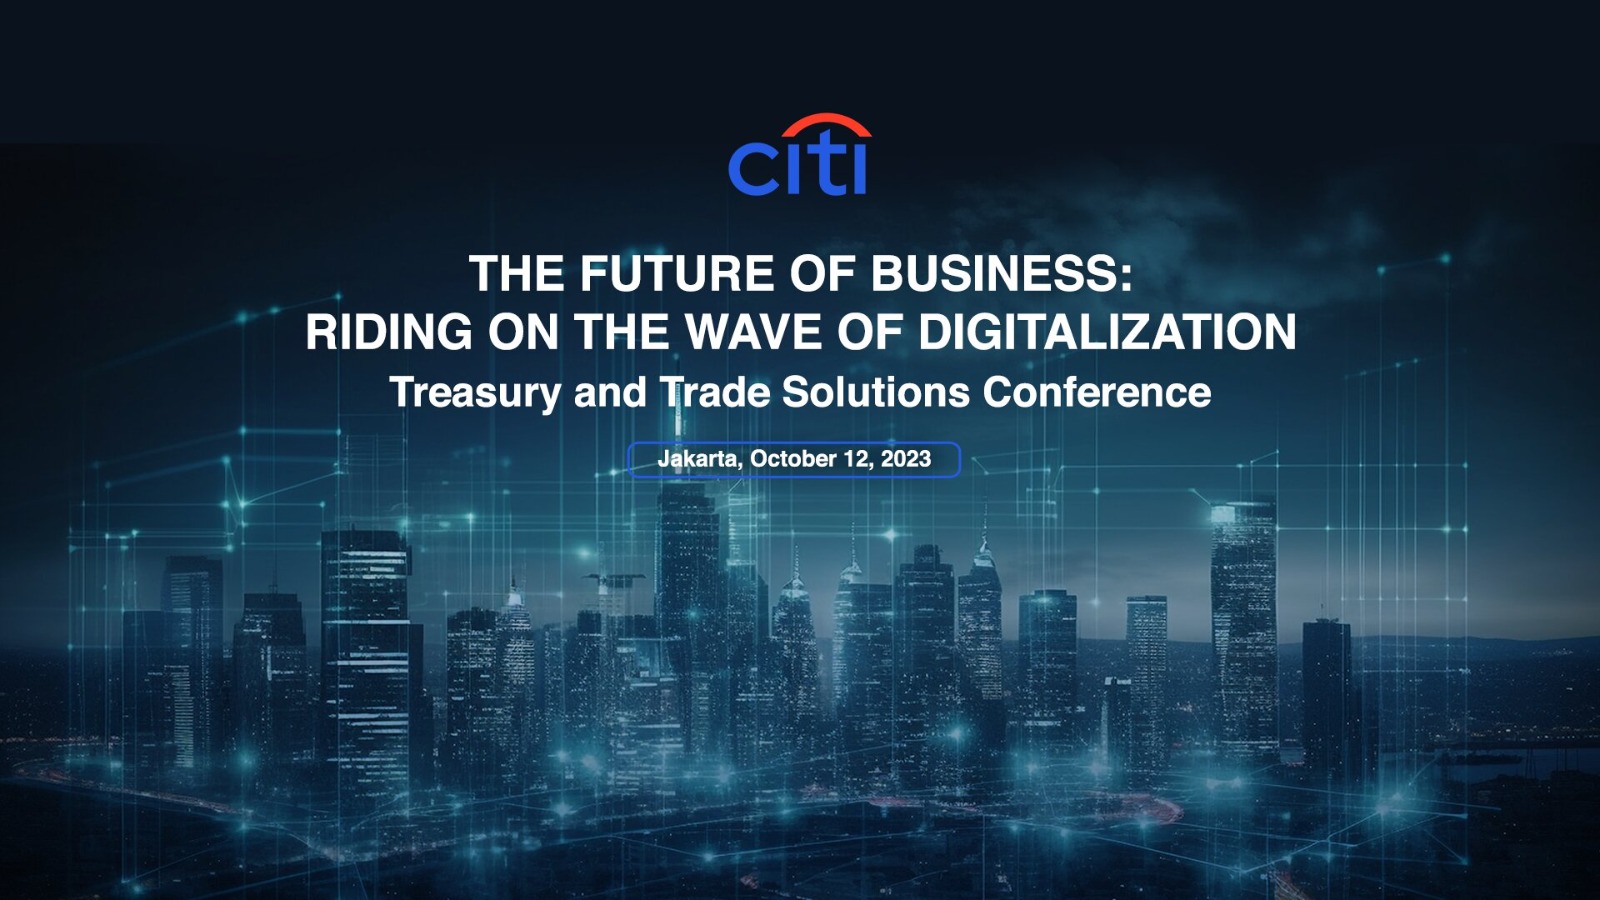 TTS CONFERENCE “THE FUTURE OF BUSINESS: RIDING ON THE WAVE OF DIGITALIZATION”